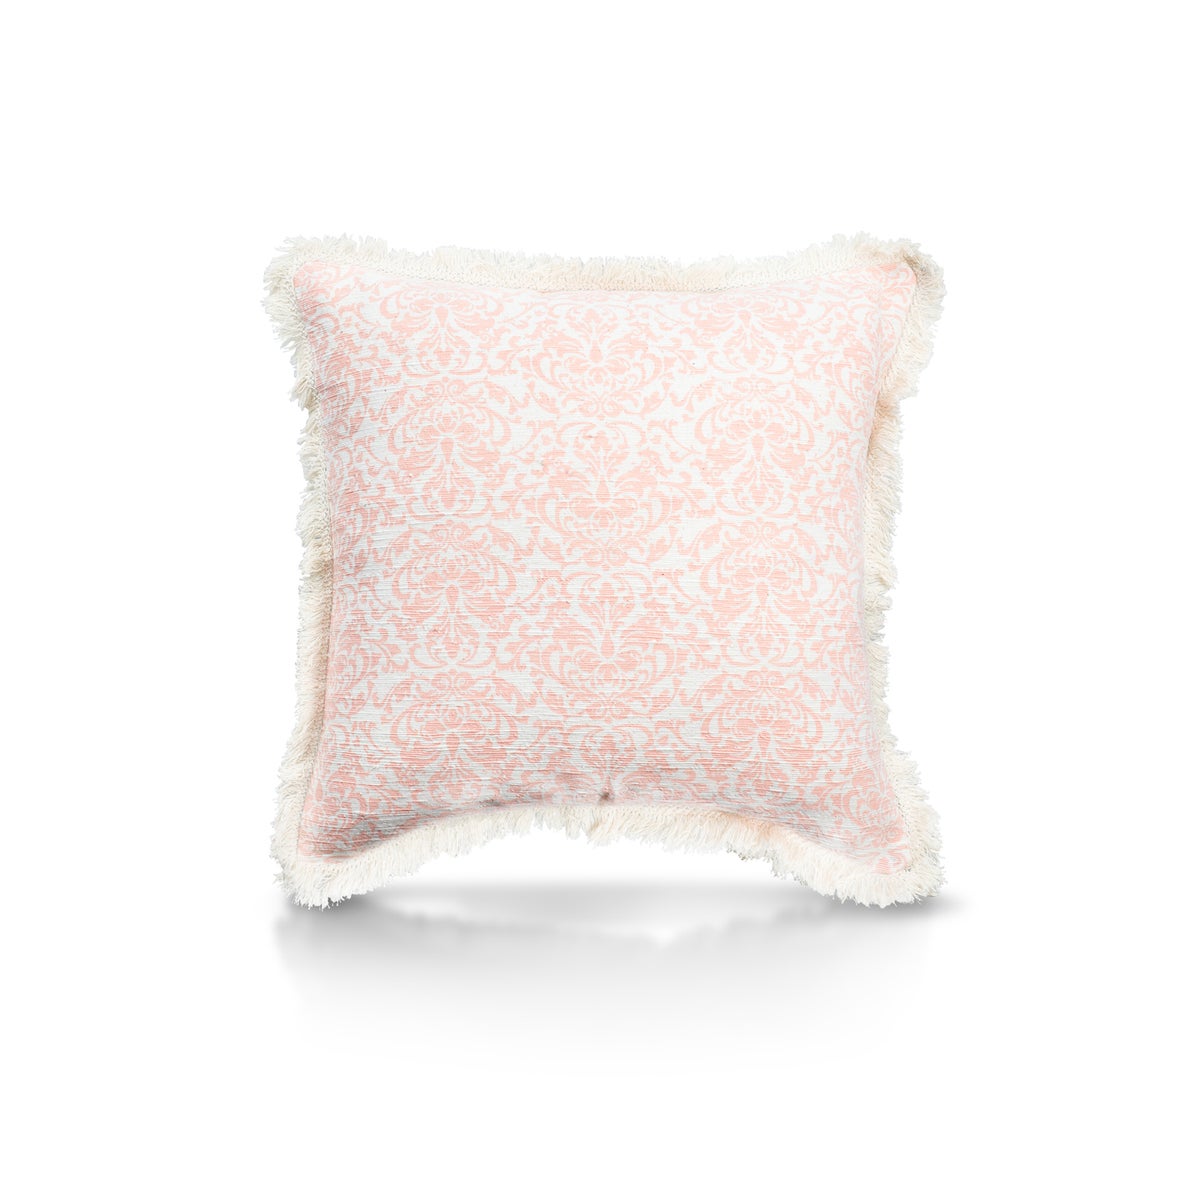 Pillow, 20" with Fringe - Damask, Coral